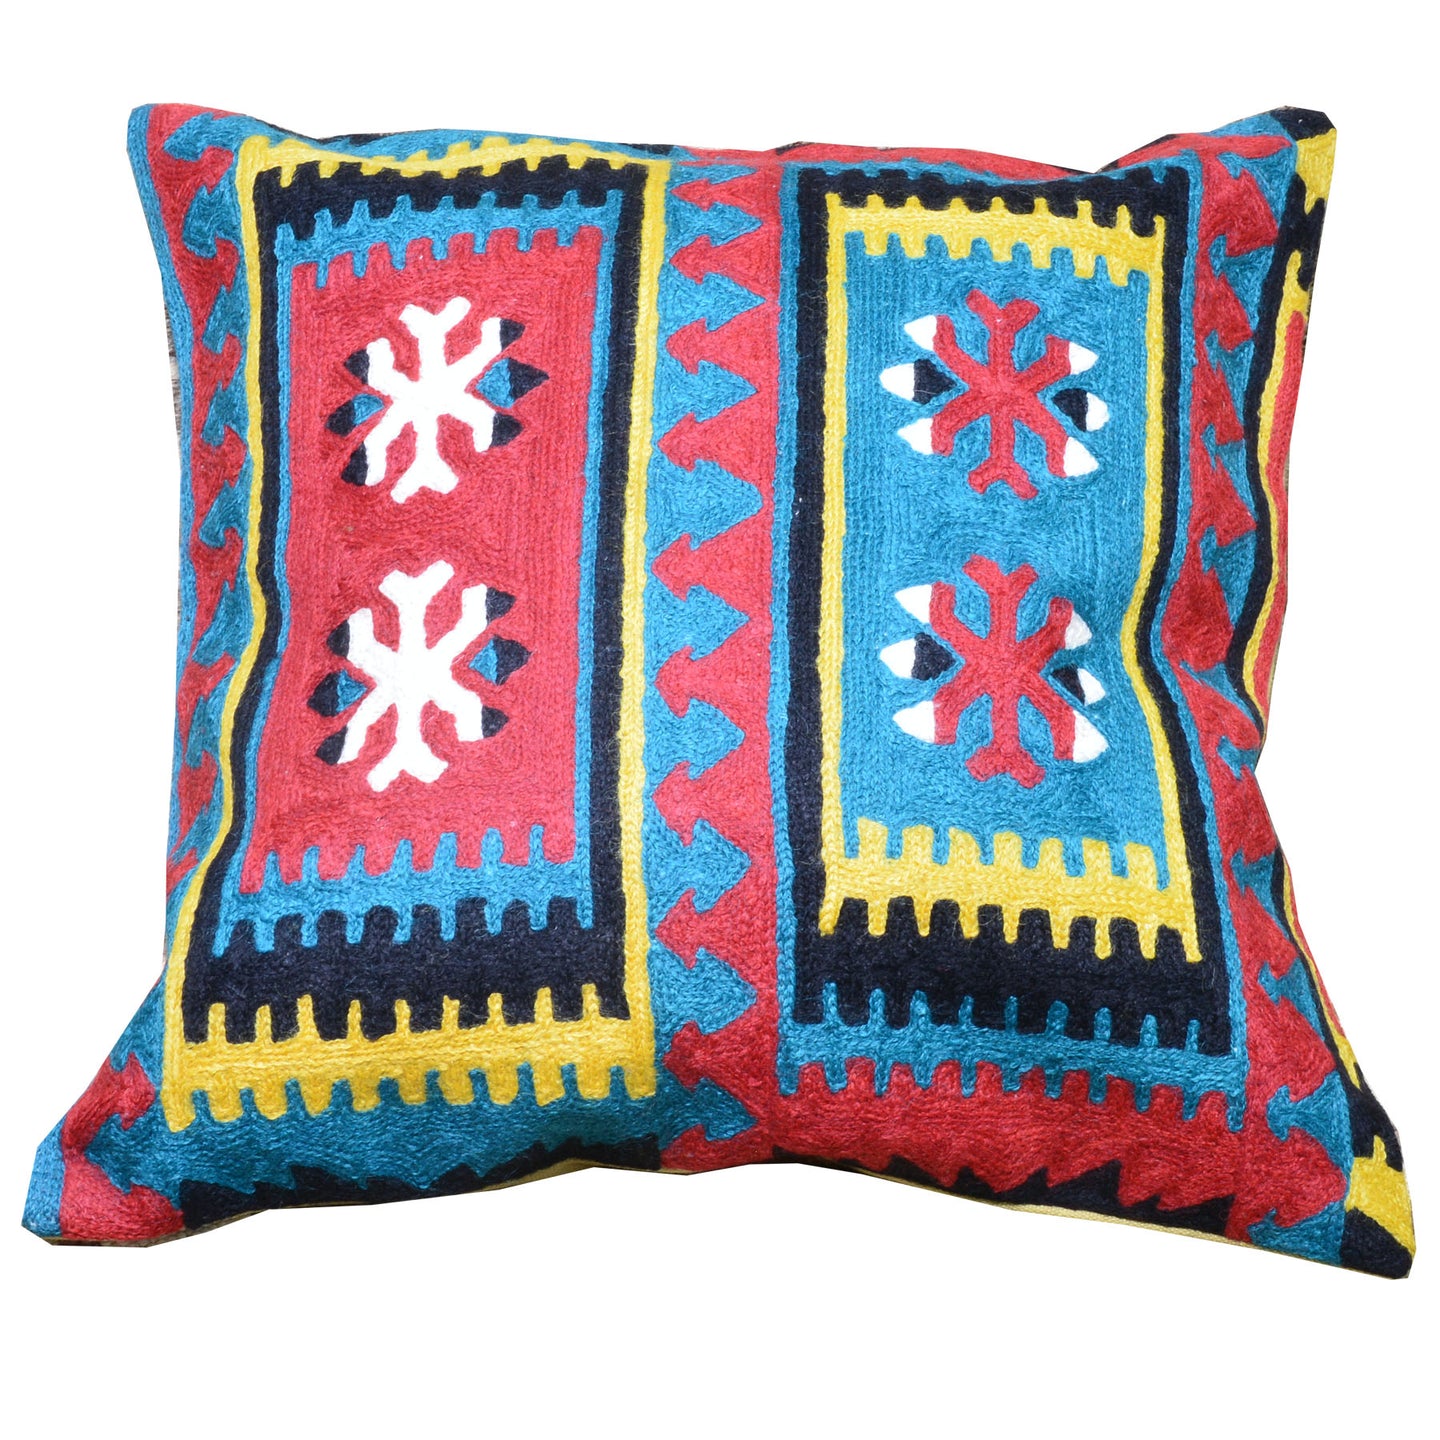 18 x 18 Southwestern Design Chain Stitch Handmade Pillow Cover Cwpal-234